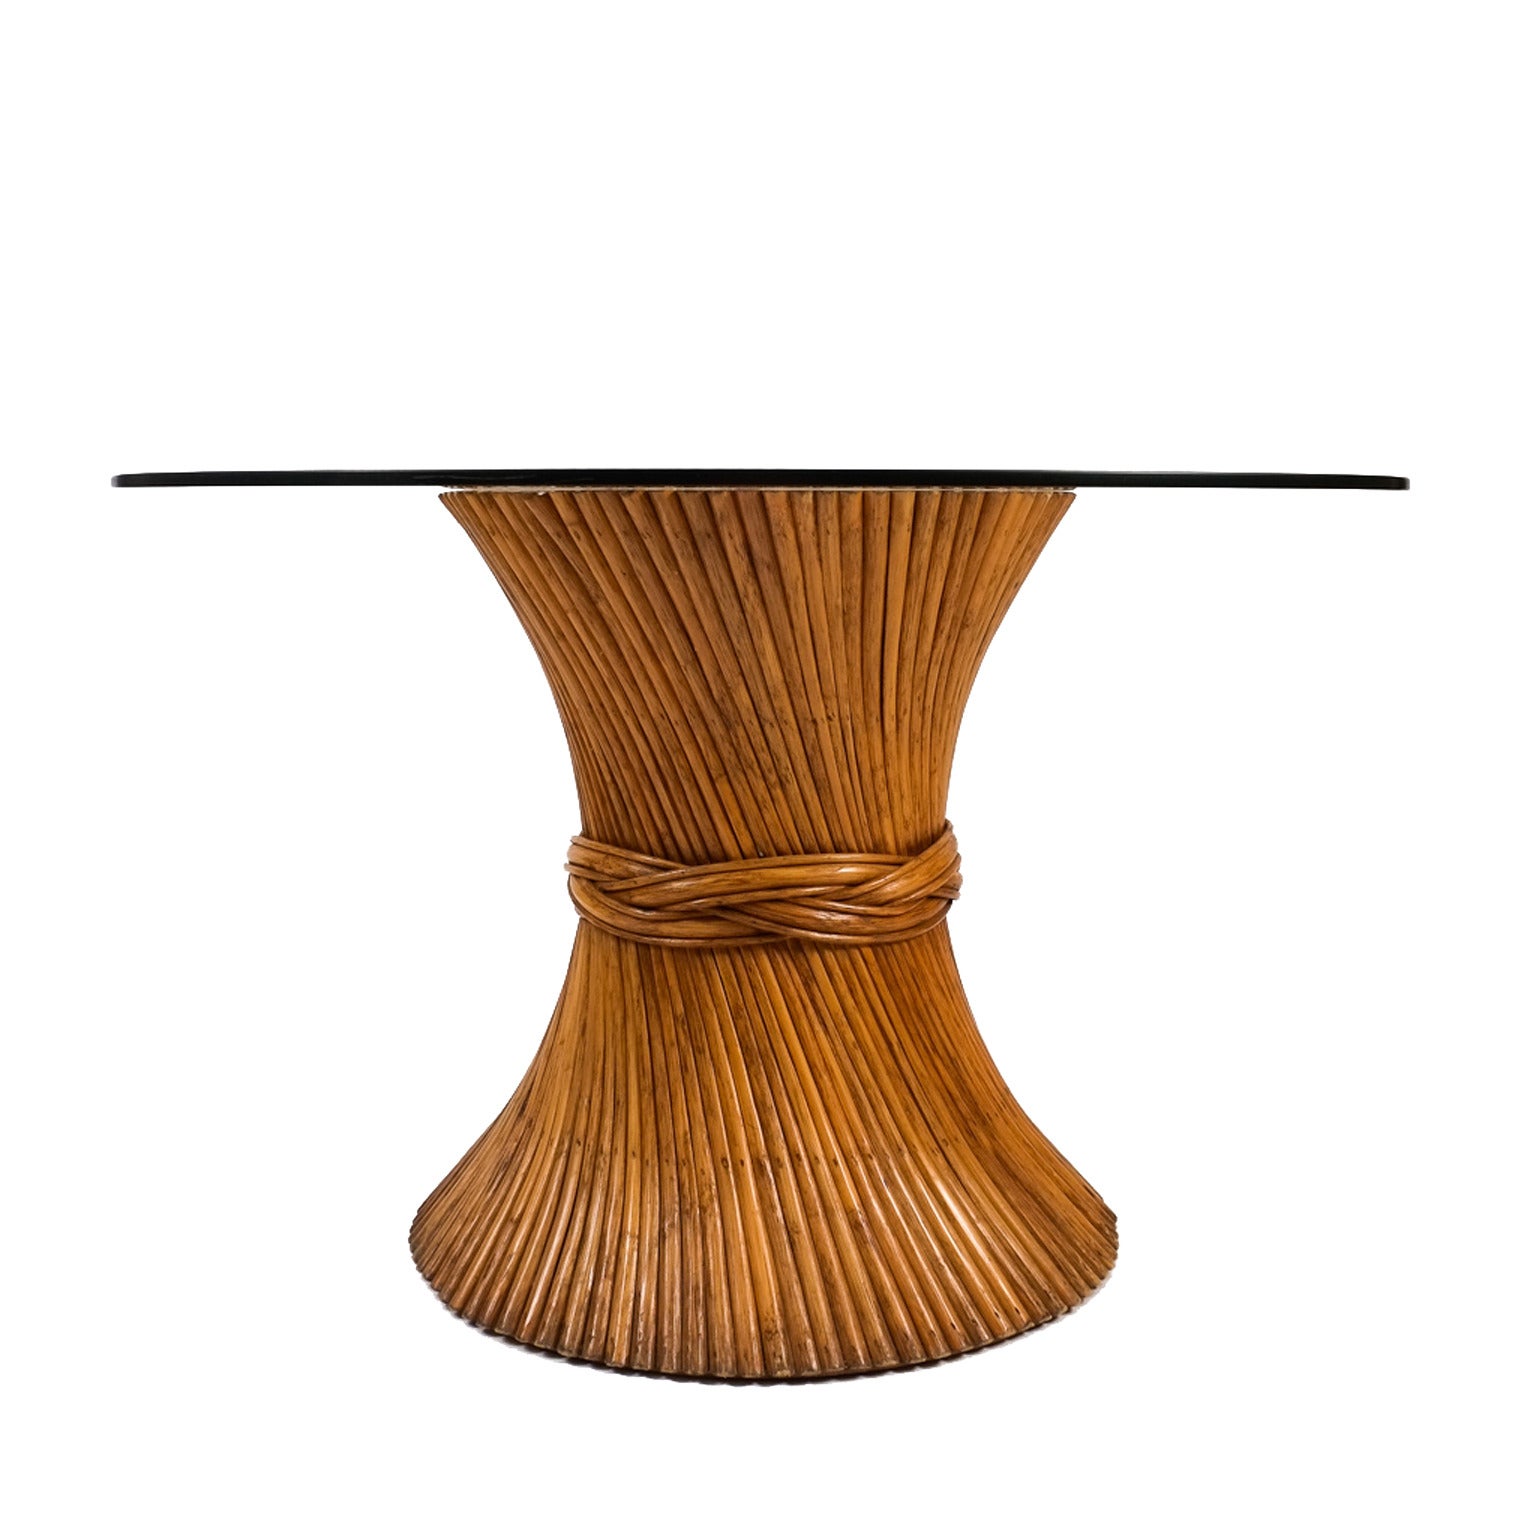 McGuire Sheaf of Bamboo Dining Table